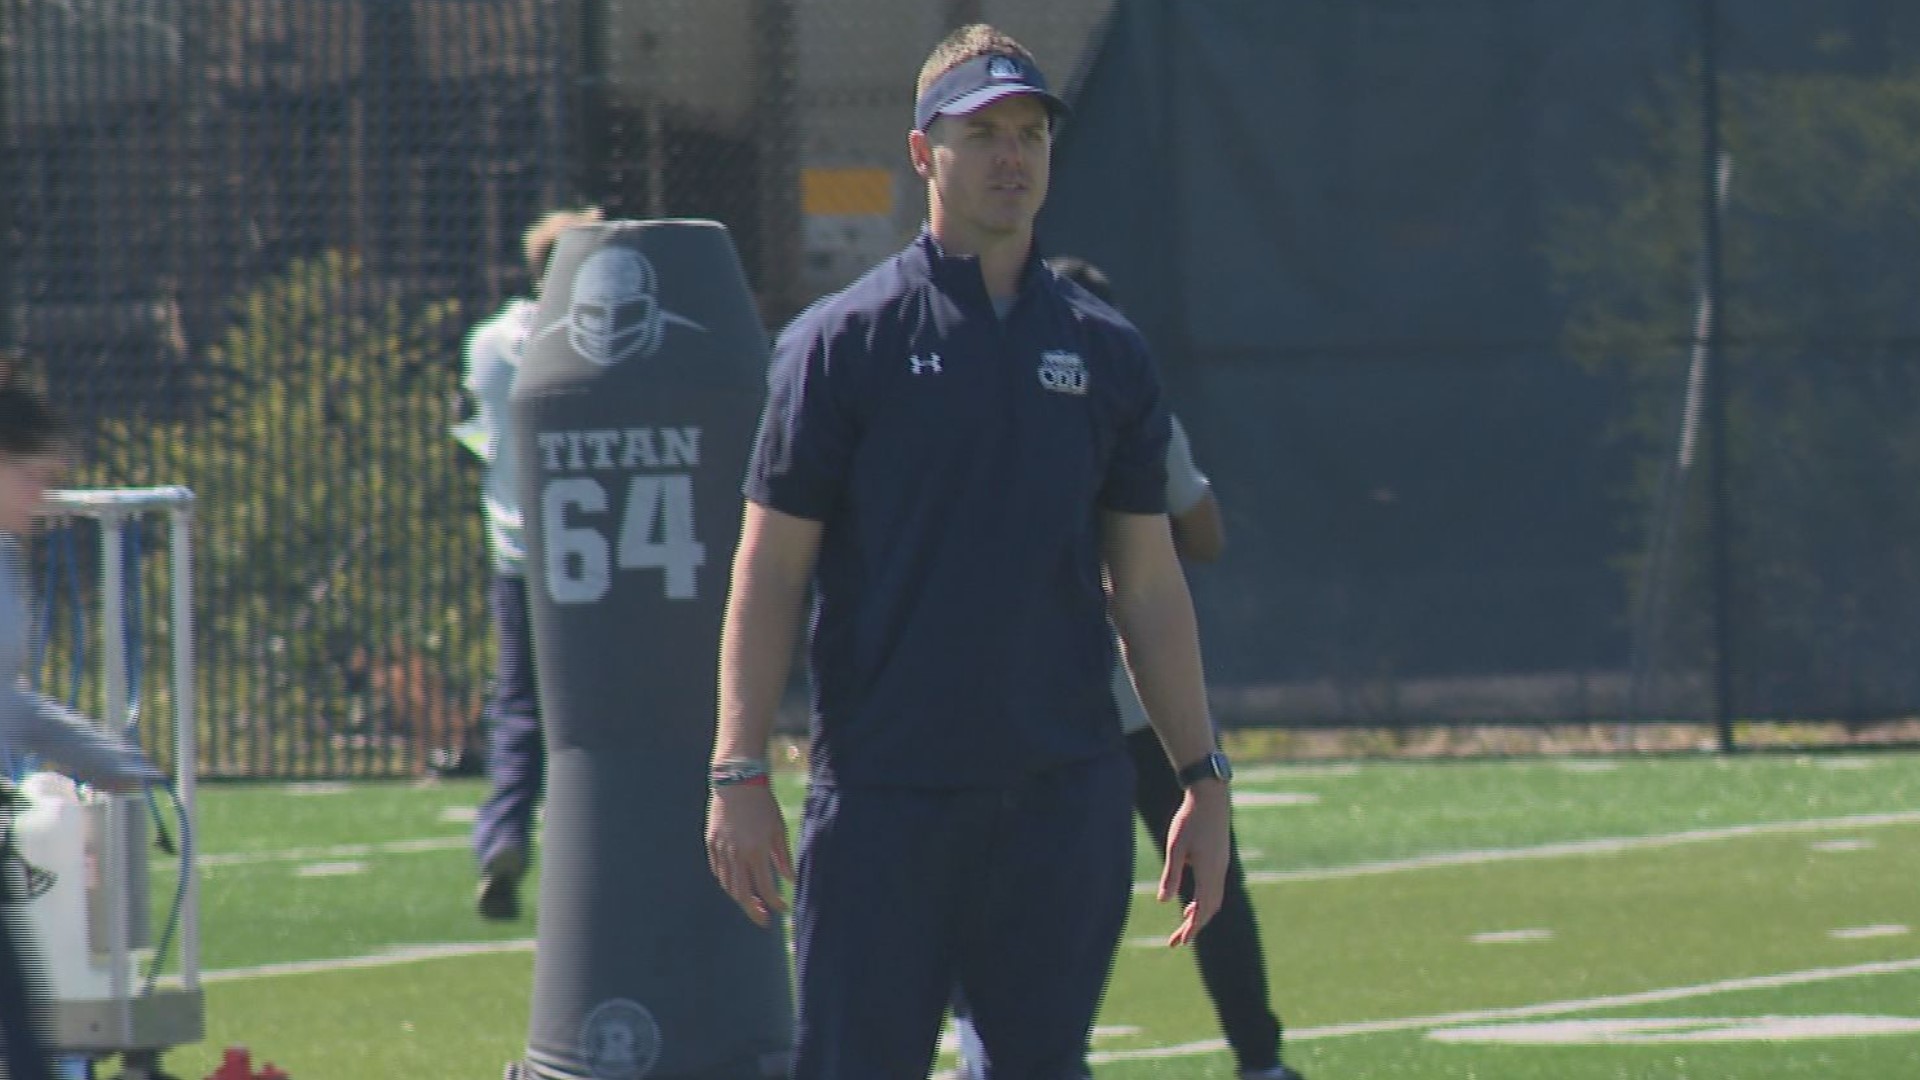 Kevin Decker, who comes to Norfolk from Fordham University after four seasons, guided the Rams to 2nd in the nation in FCS averaging 49.5 points per game last year.